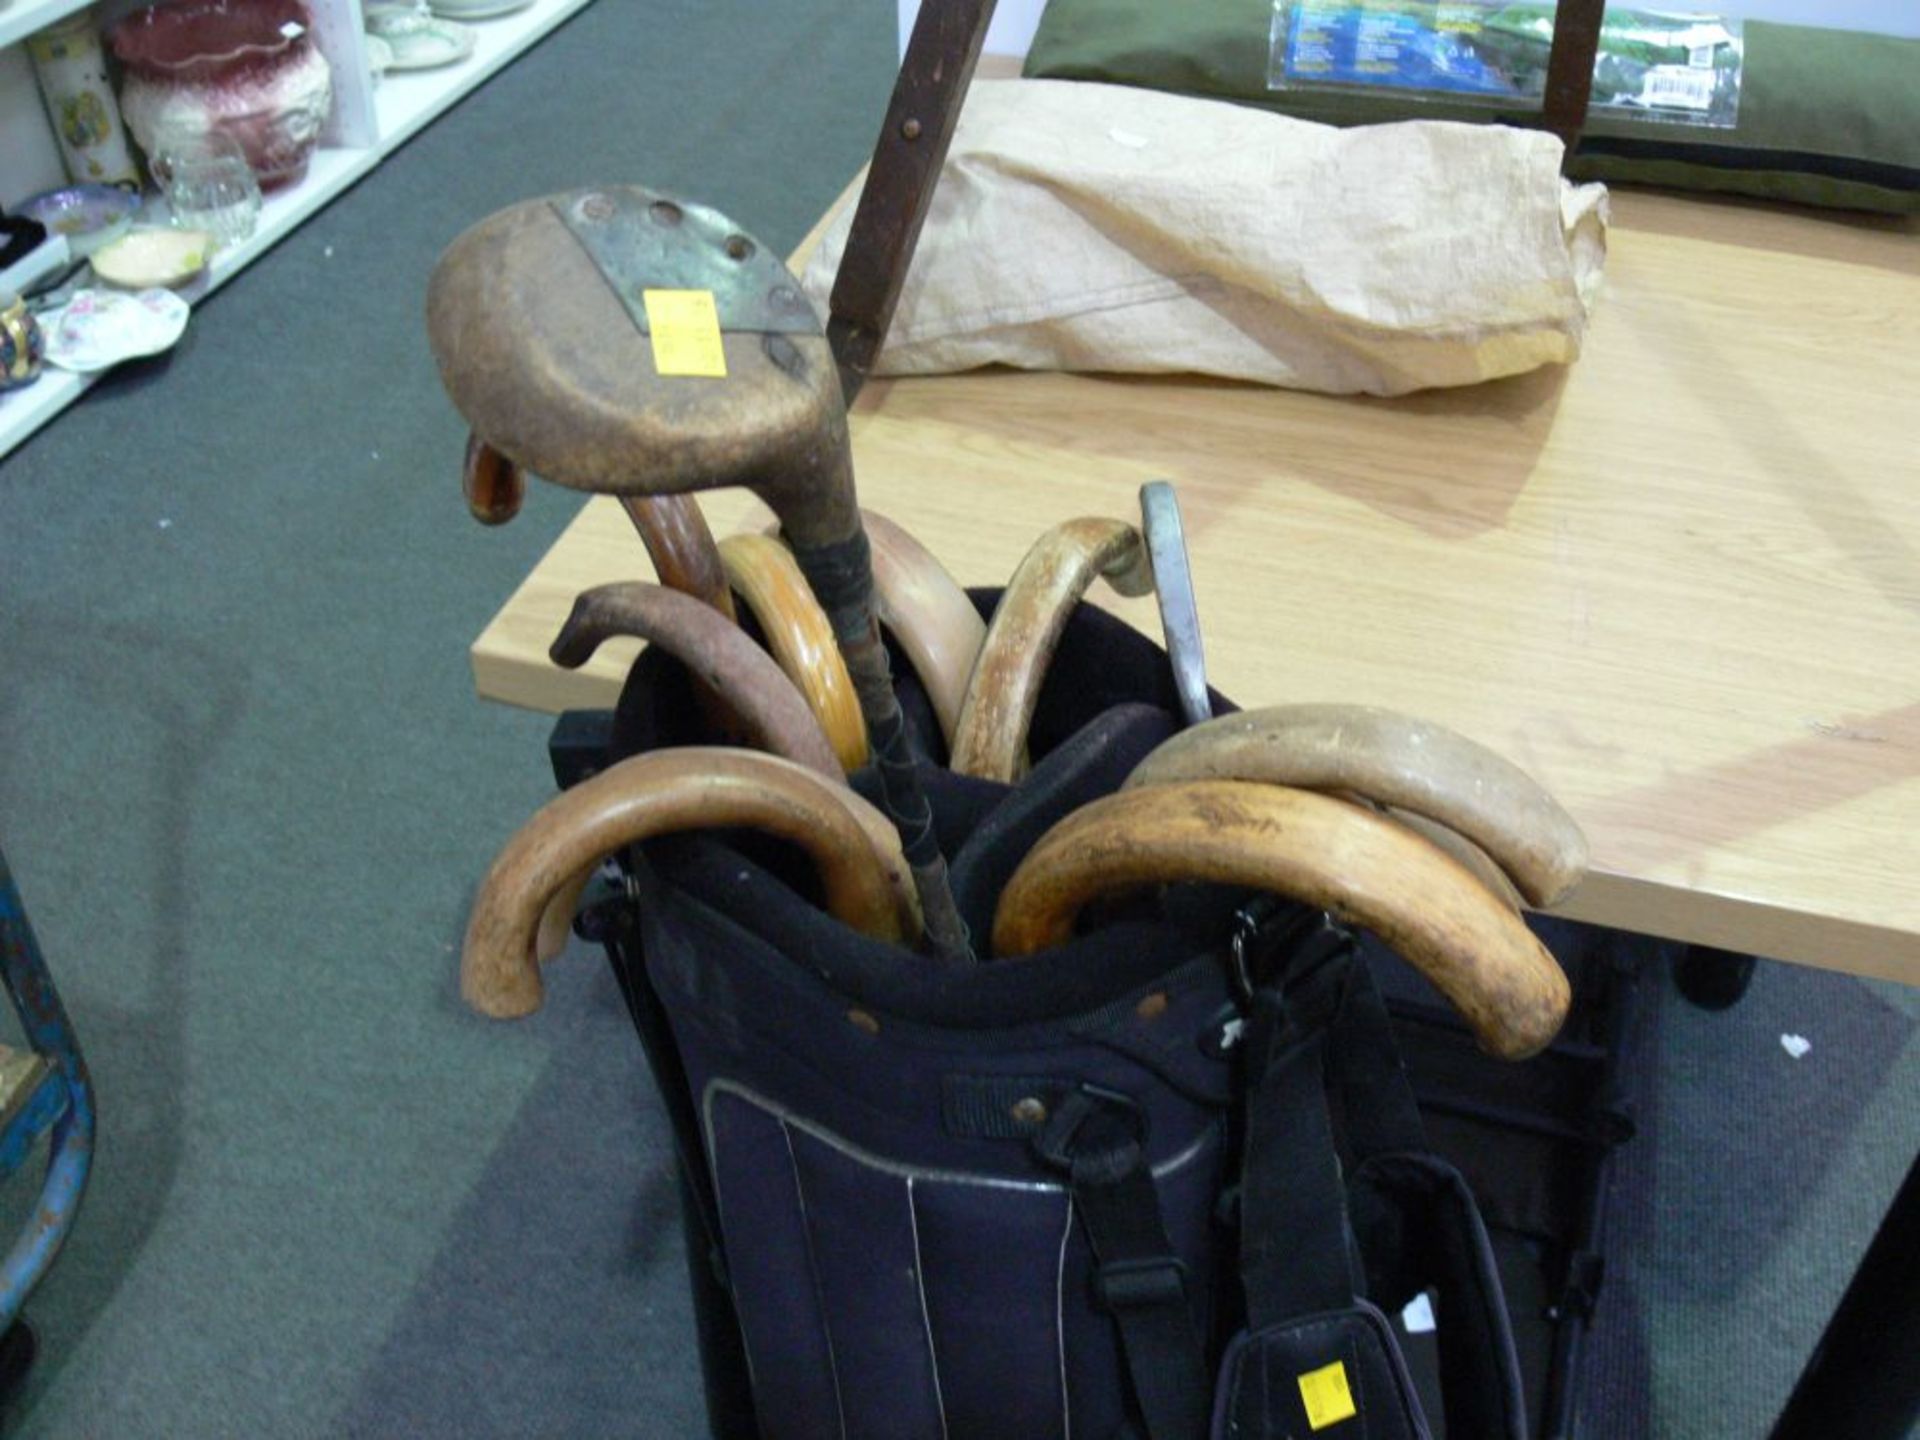 Large wooden Easel, Golf Bag and contents, Fishing Tent (in bag), Fishing Chair, Camping Pegs ( - Bild 2 aus 6